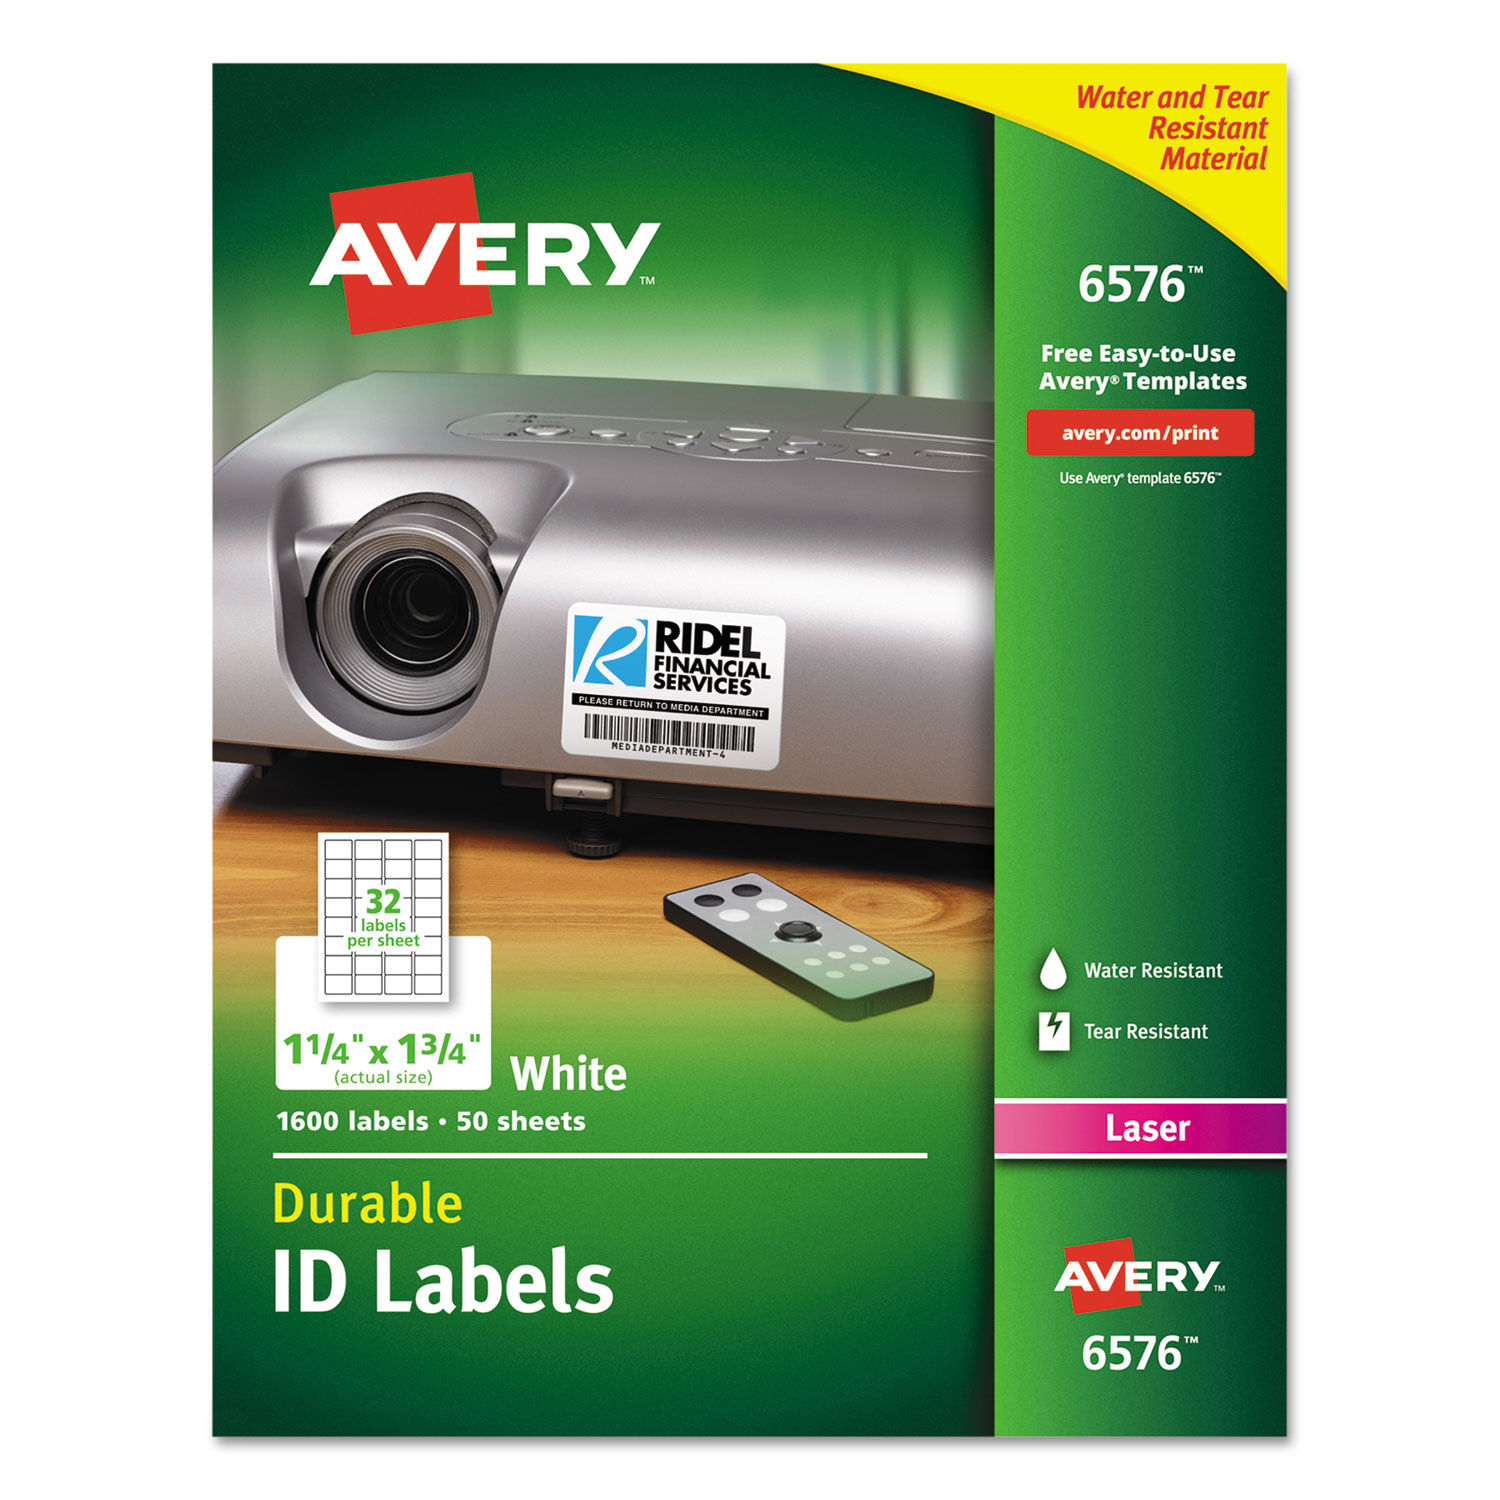 Durable Permanent ID Labels with TrueBlock Technology Laser Printers, 1.25 x 1.75, White, 32/Sheet, 50 Sheets/Pack